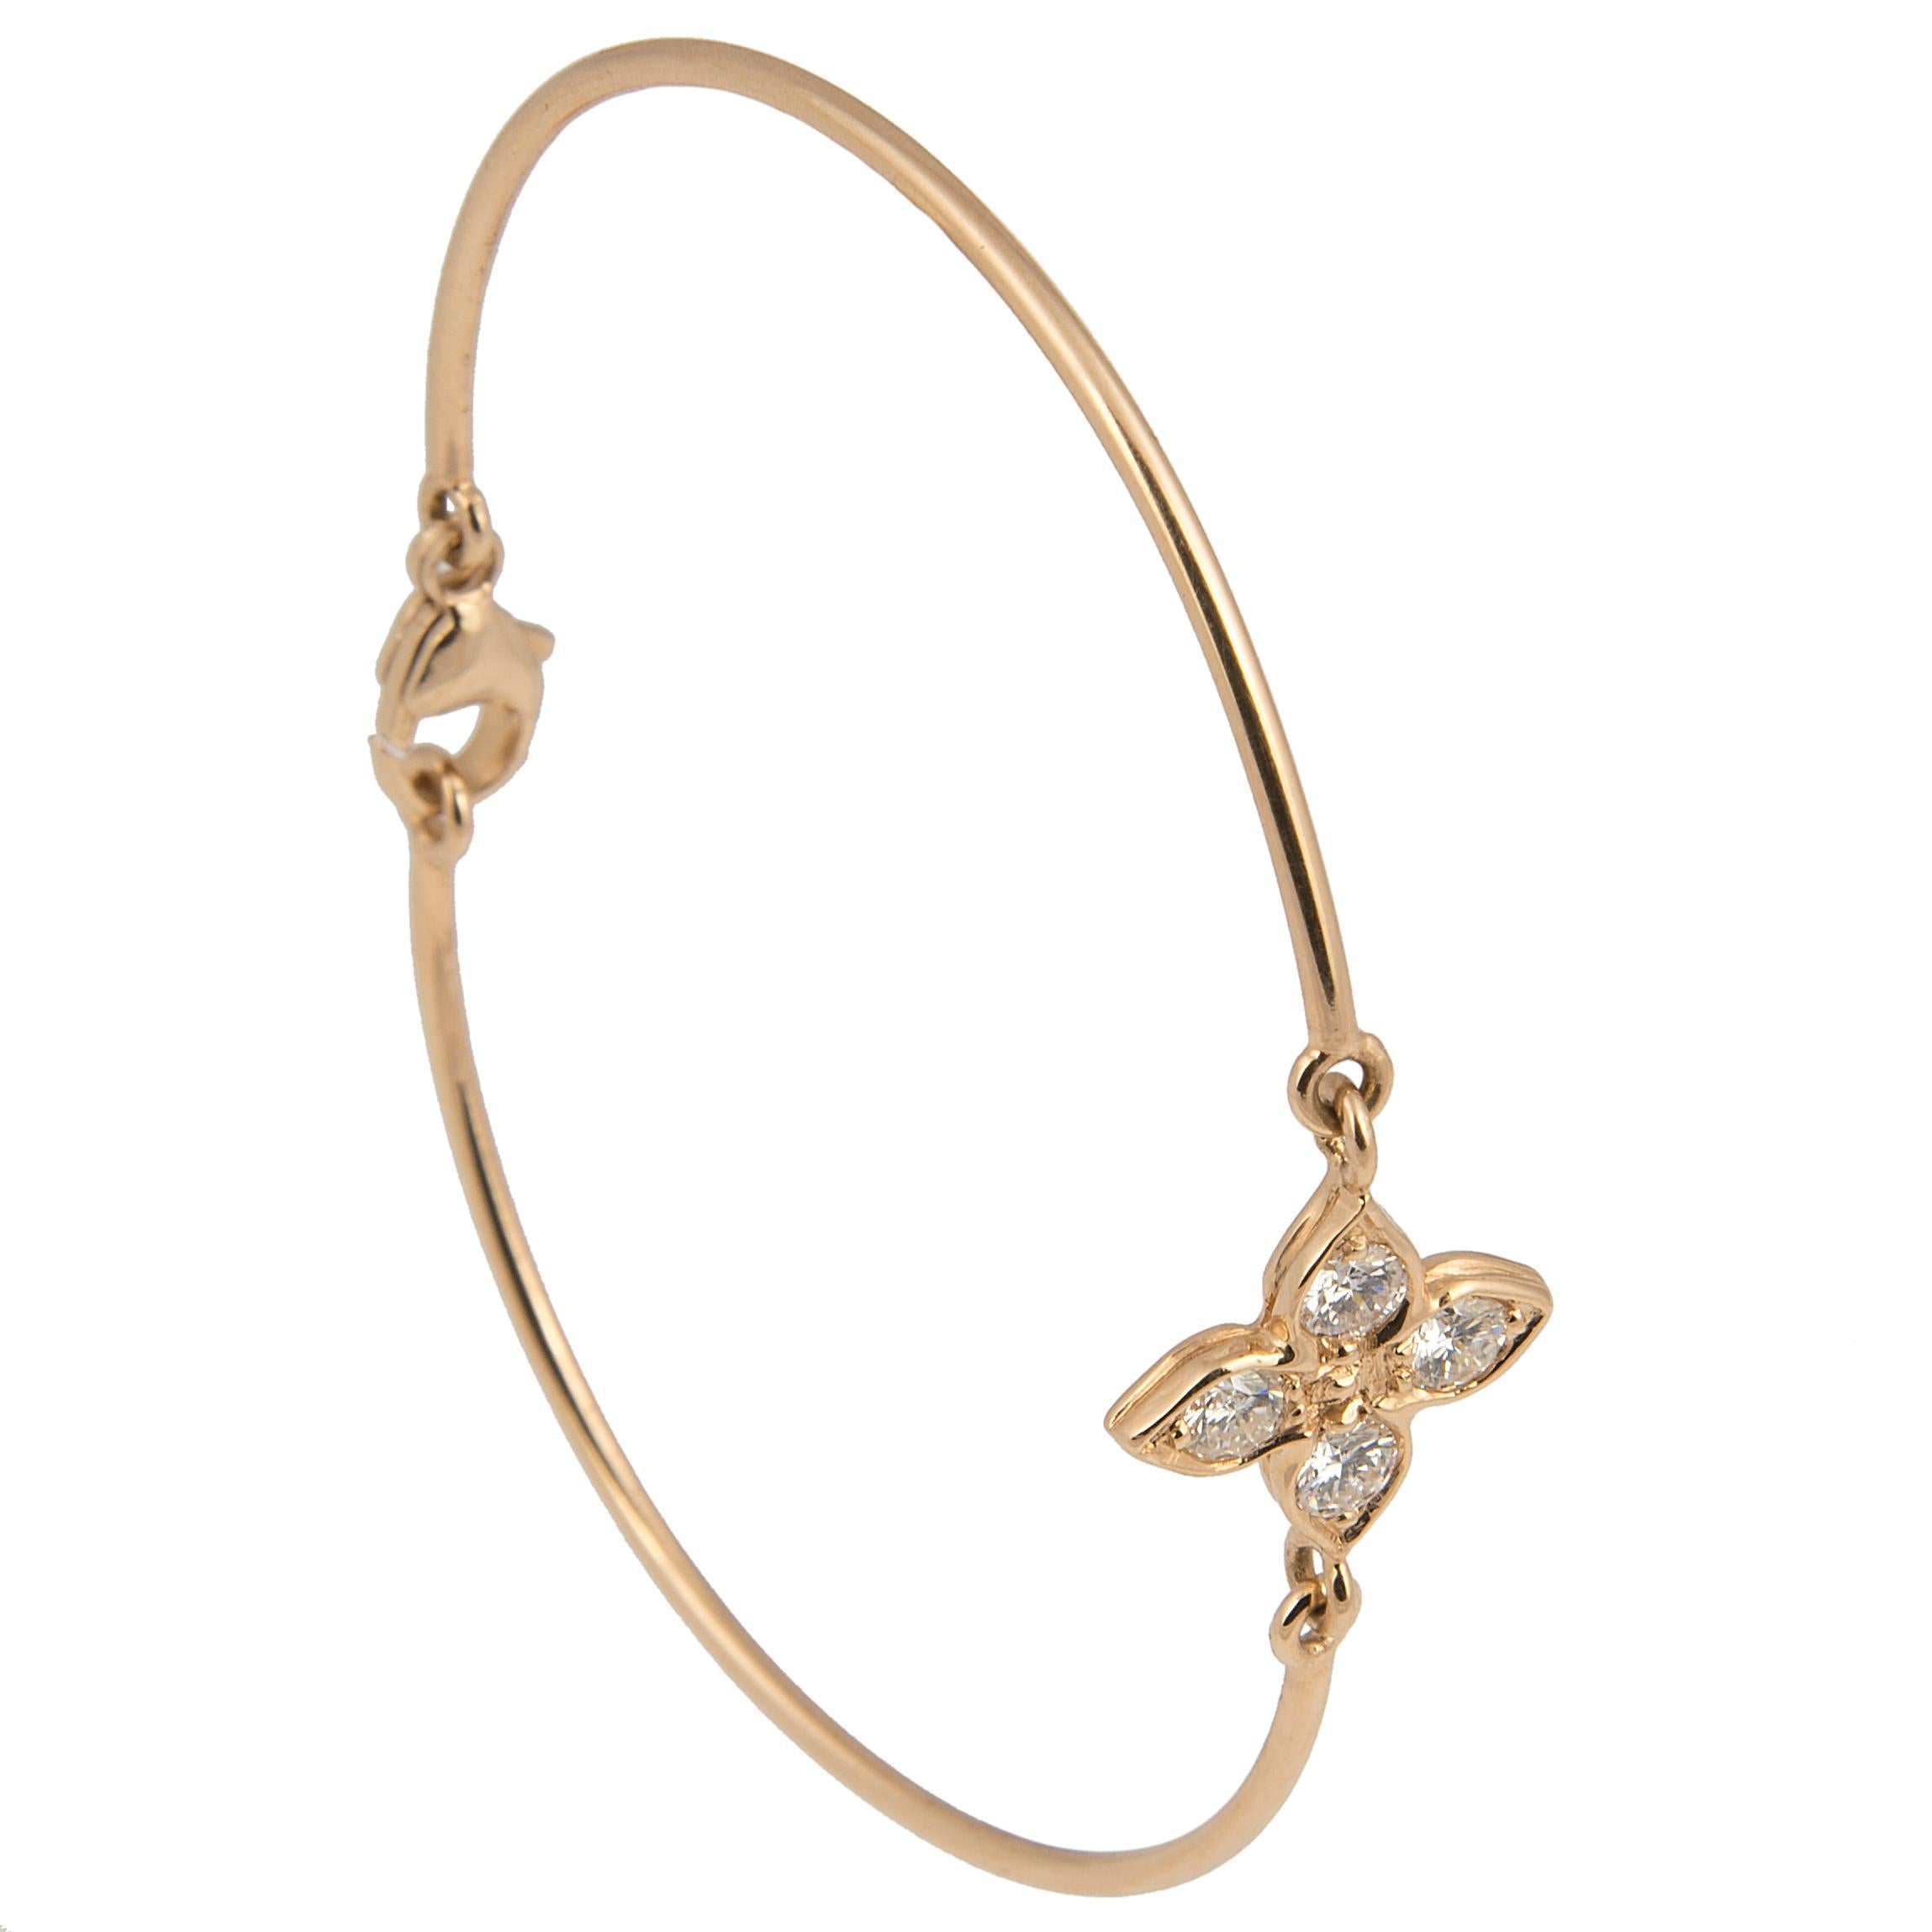 Elegant bracelet designed by Florence Larochas, the articulated 18kt yellow gold wire centred by a shower shaped motif, each petal set with a brilliant cut F/G color diamond.
